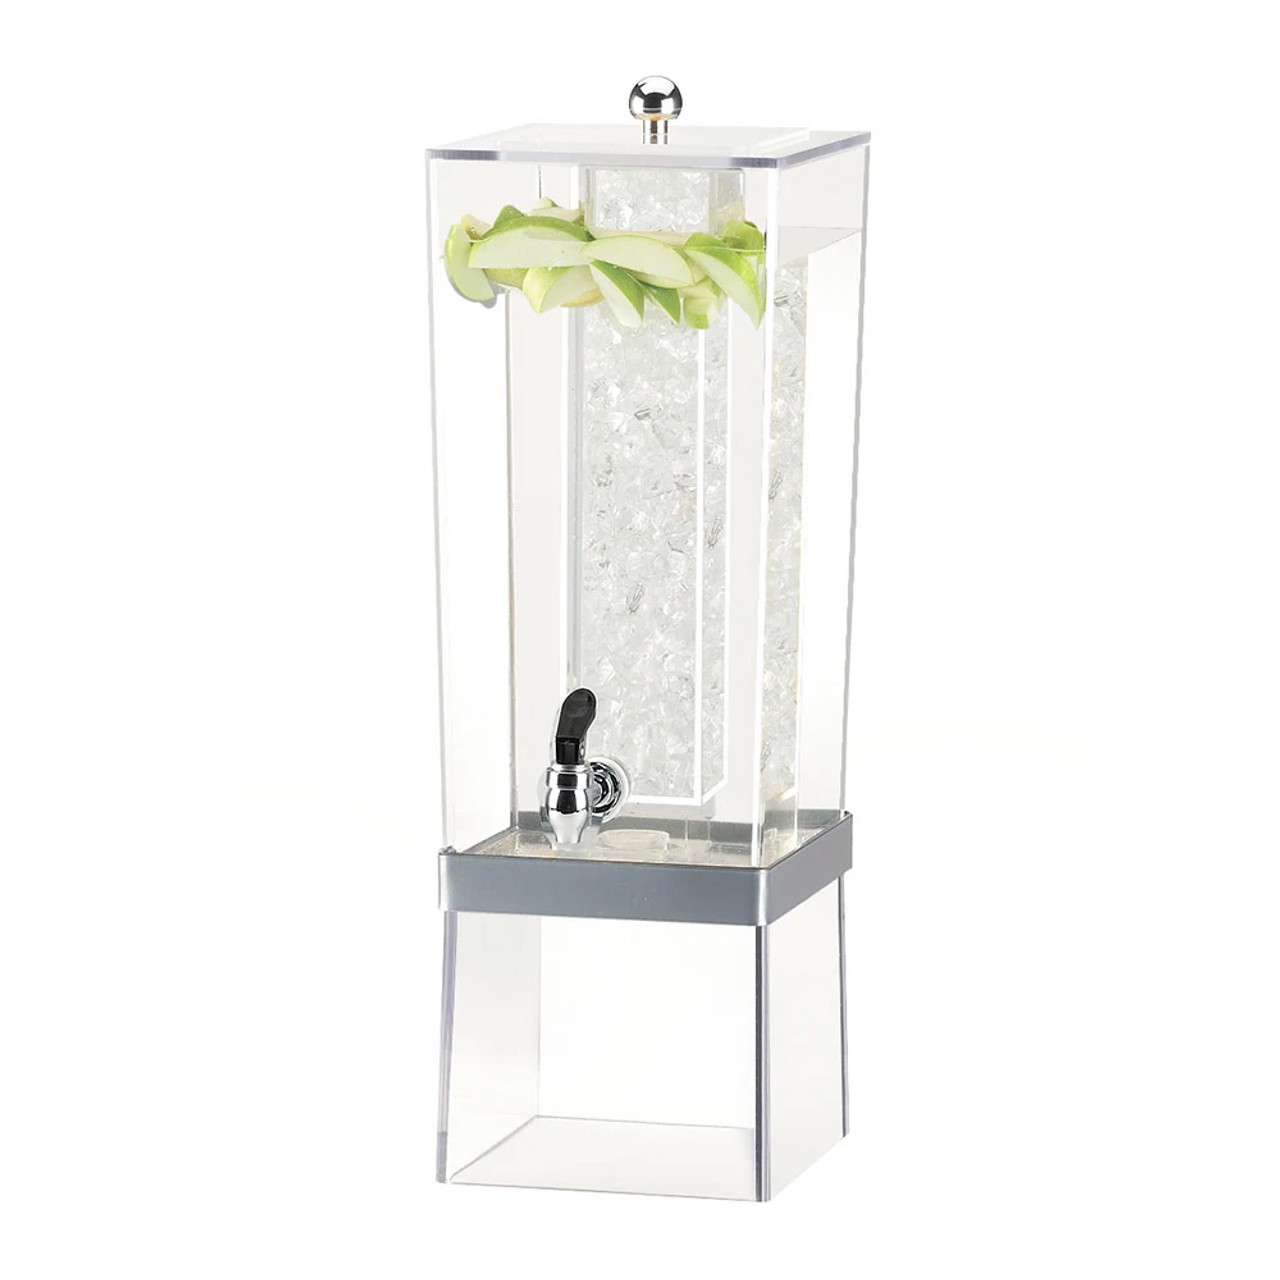 Cal-Mil Clear/Silver 3 gal Beverage Dispenser with Ice Tube - Polycarbonate Tank - Chicken Pieces